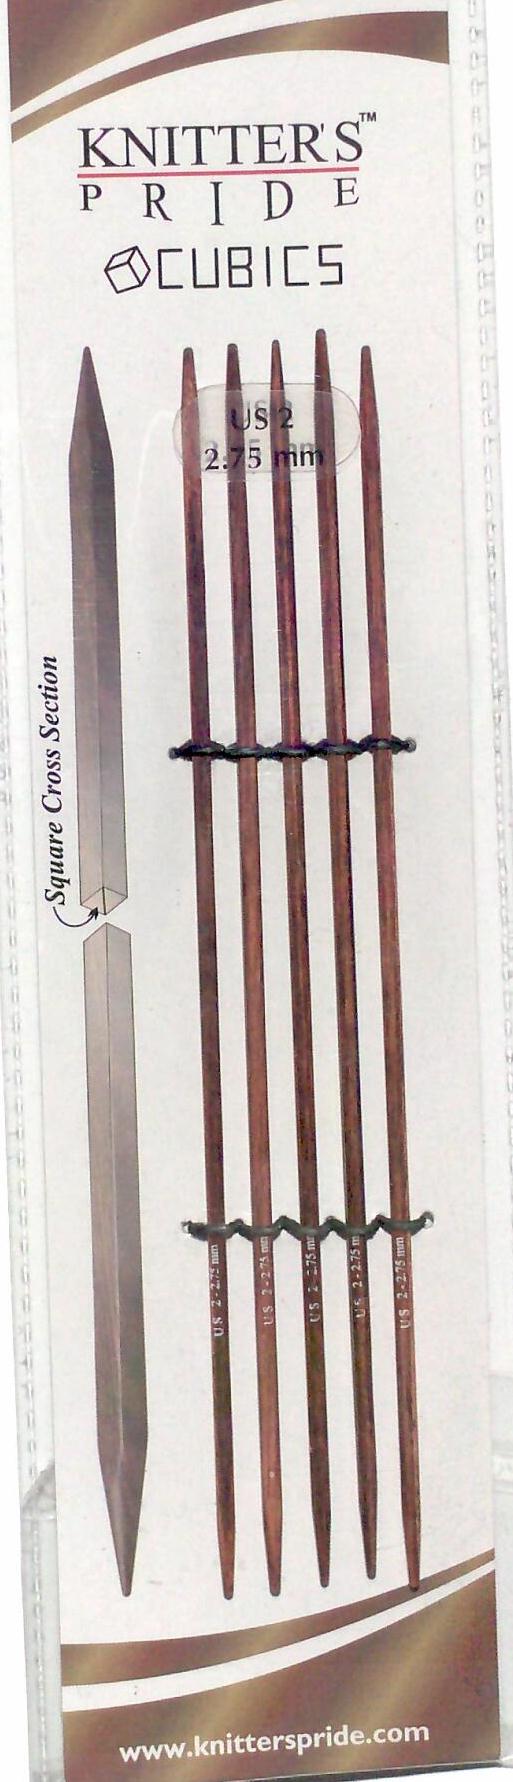 Knitter's Pride 06"/15 cm 2.25 mm/US 1 Rosewood Cubics Double Point Needles 